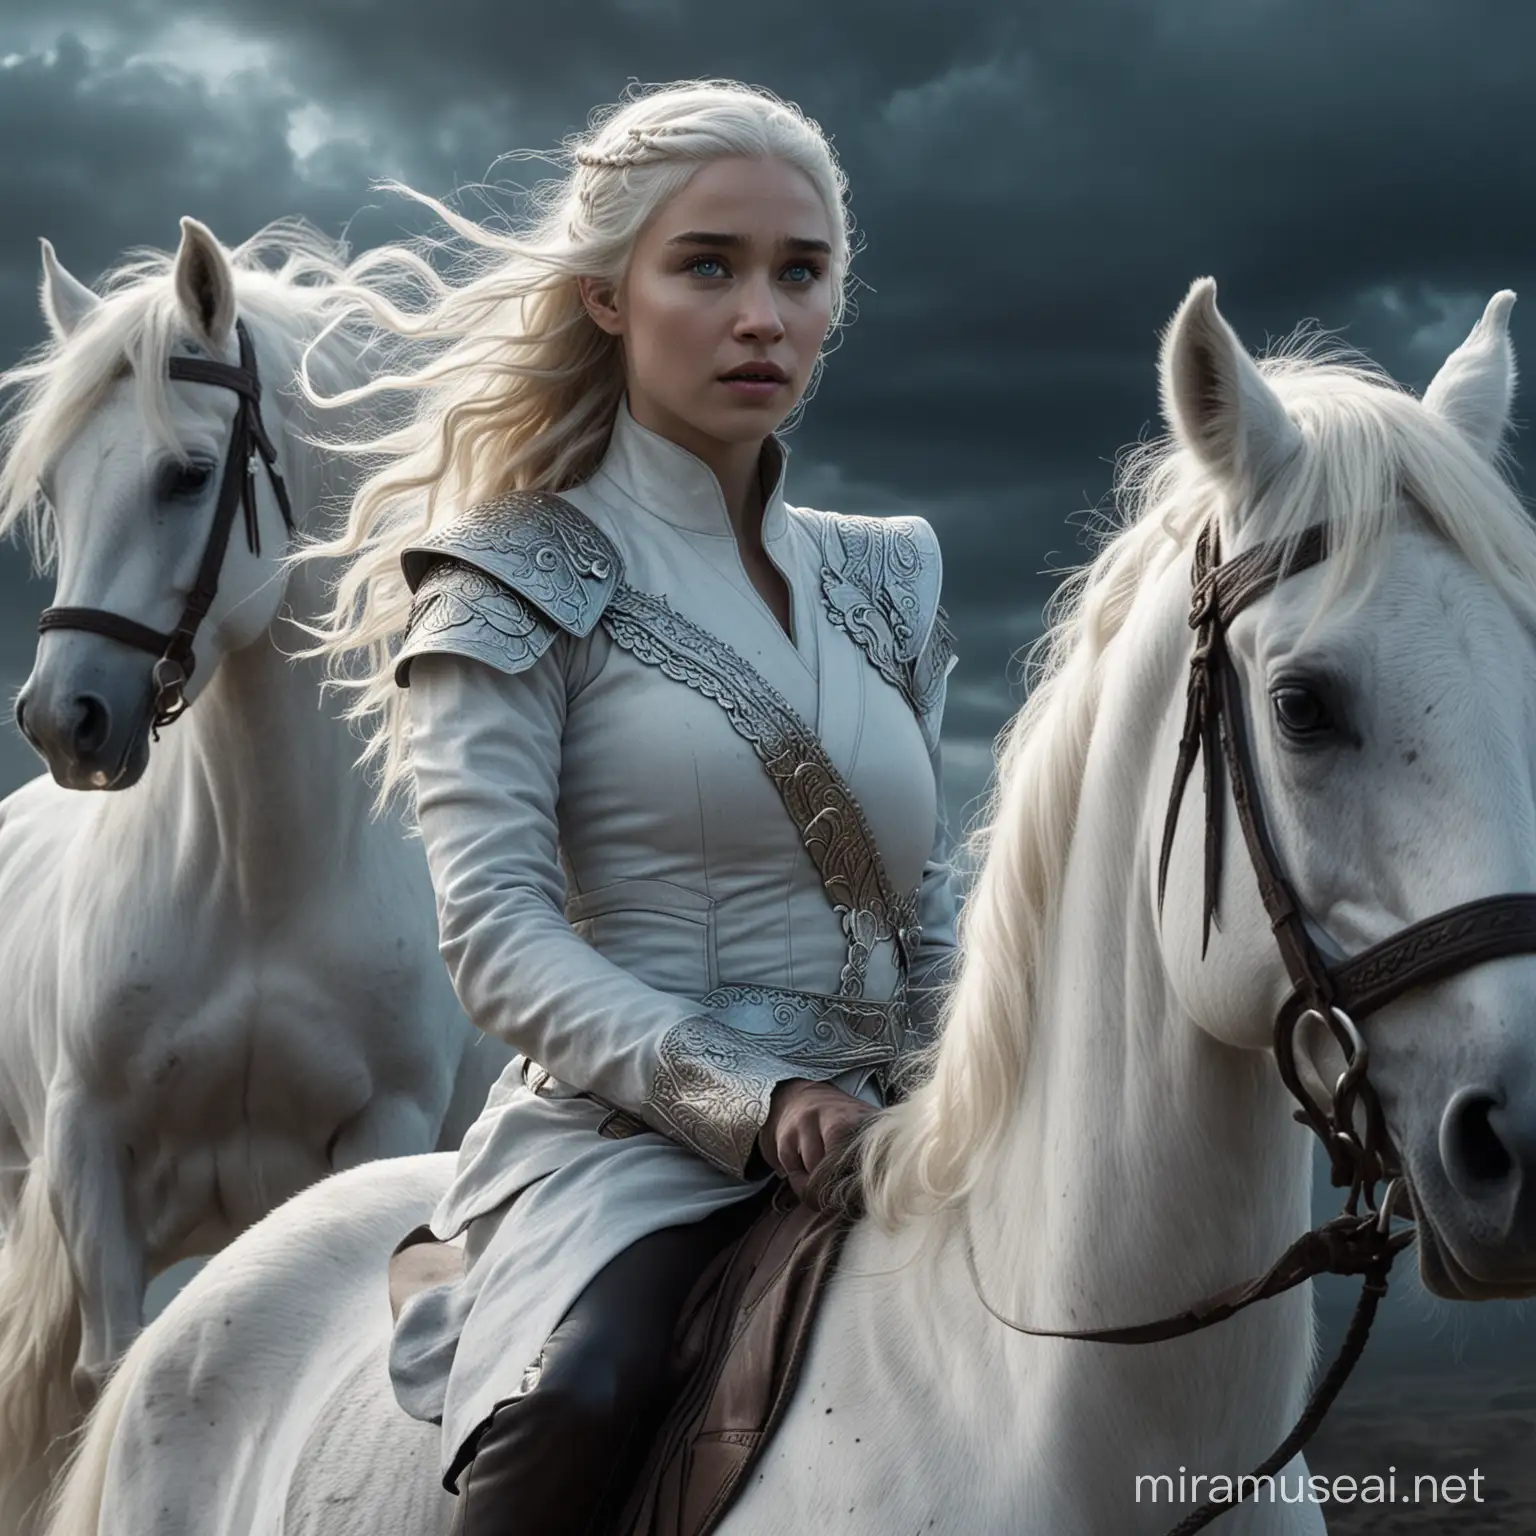 Photo of Daenerys Targaryen riding a white icelandic horse with blue eyes. Her three dragons flying above her in a dark sky